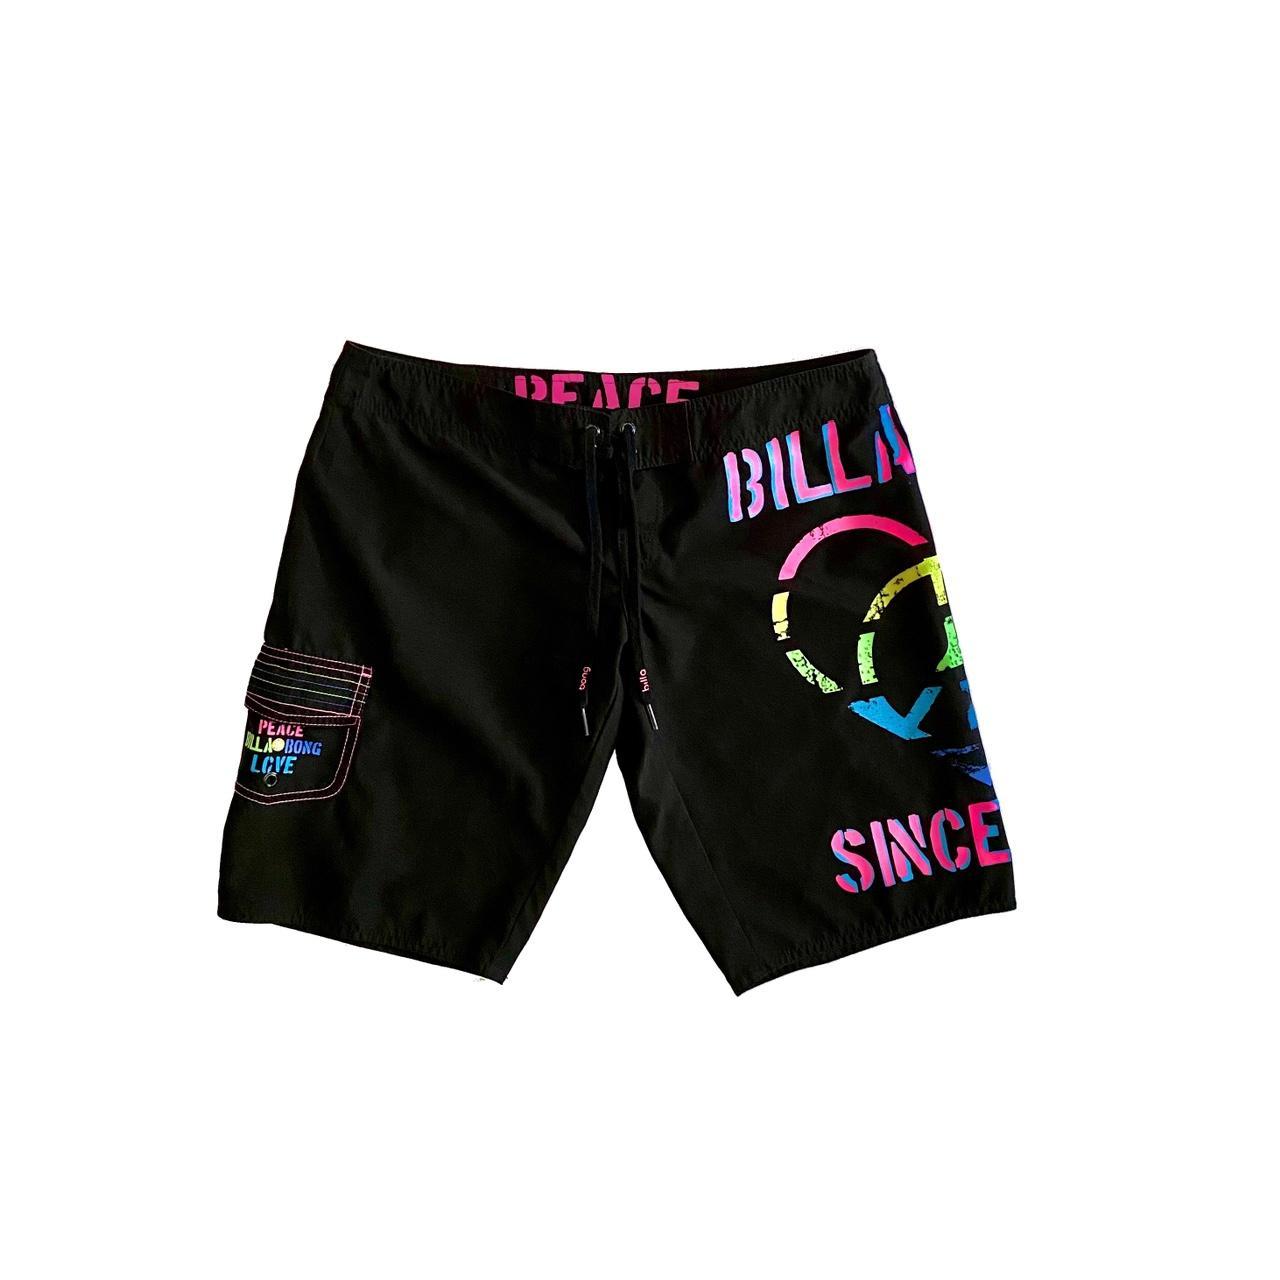 Product Image 1 - y2k board shorts

FEATURES:
this board shirt